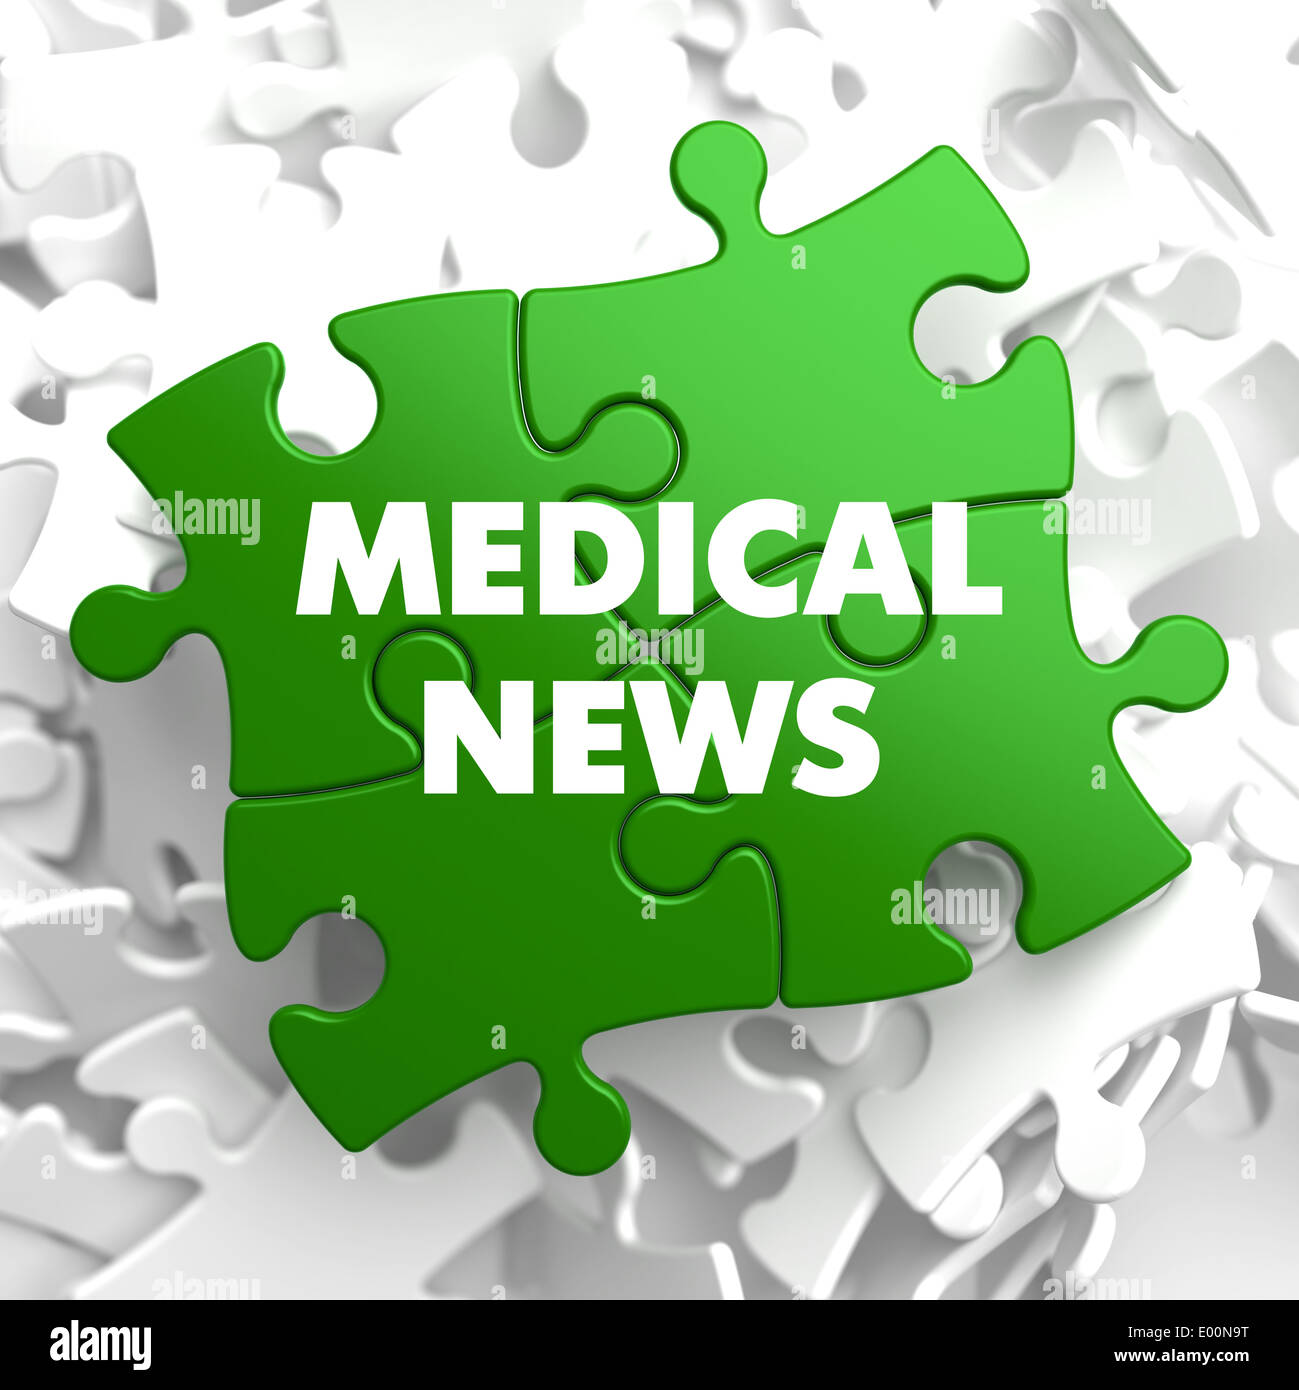 Medical News on Multicolor Puzzle on White Background. Stock Photo